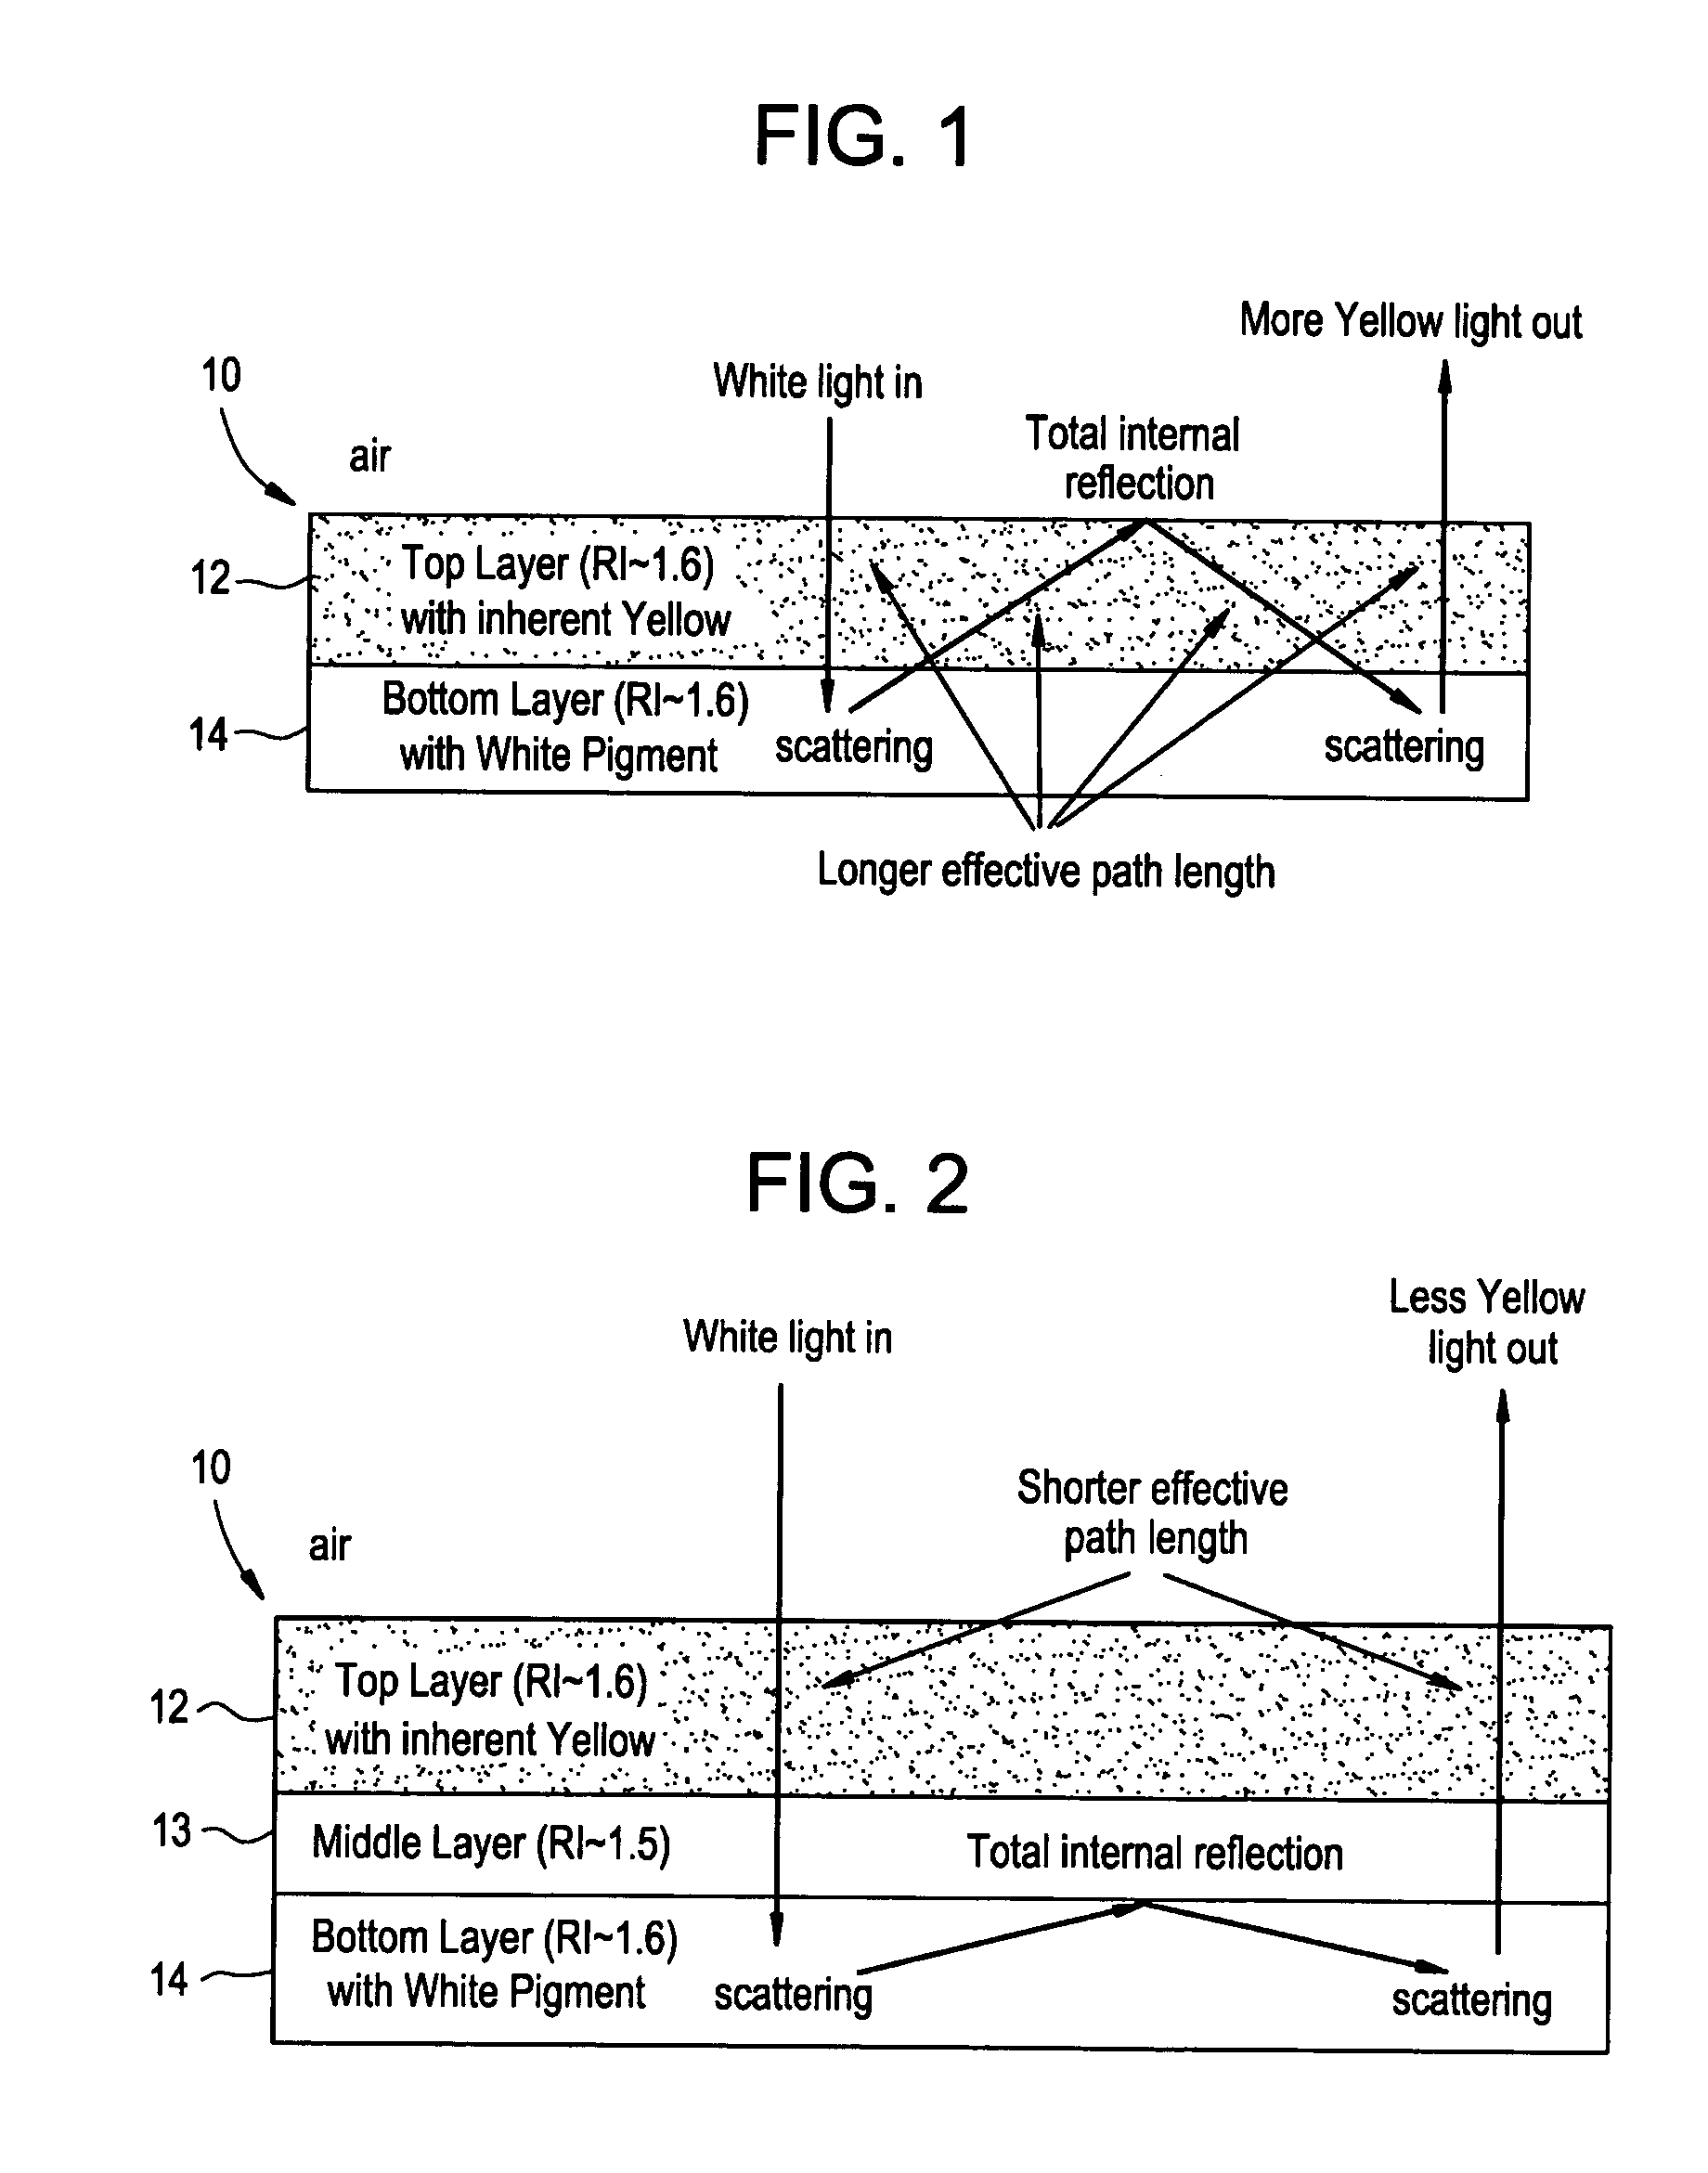 Method of reducing the color contribution of a coated top layer in a multi-layer material